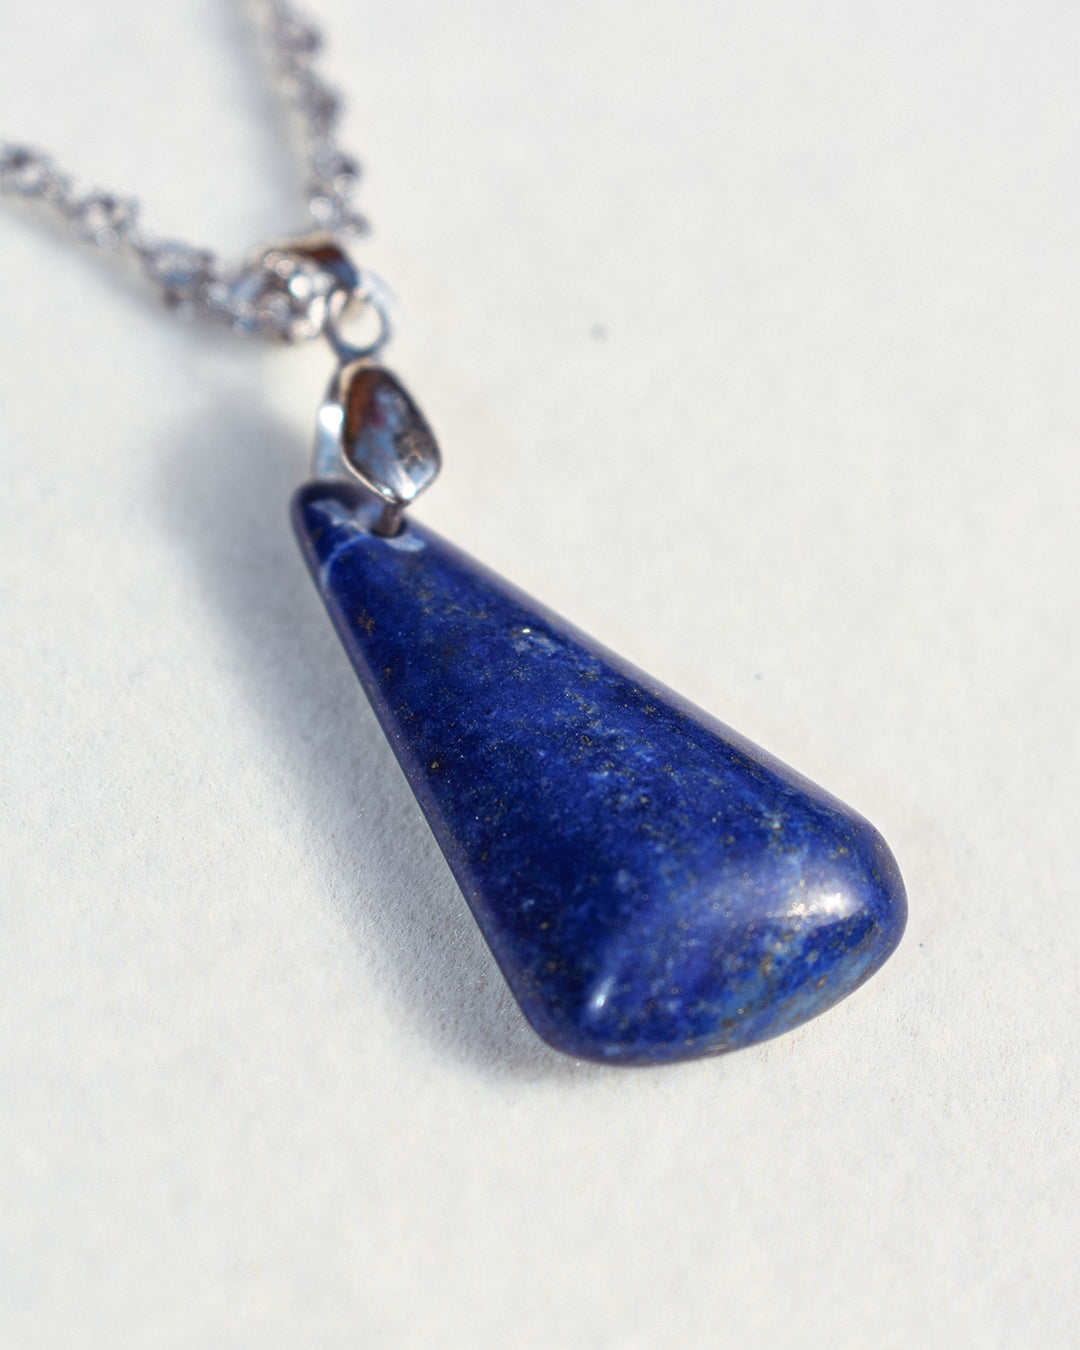 Stainless Steel chain with Lapis Lazuli crystal pendant